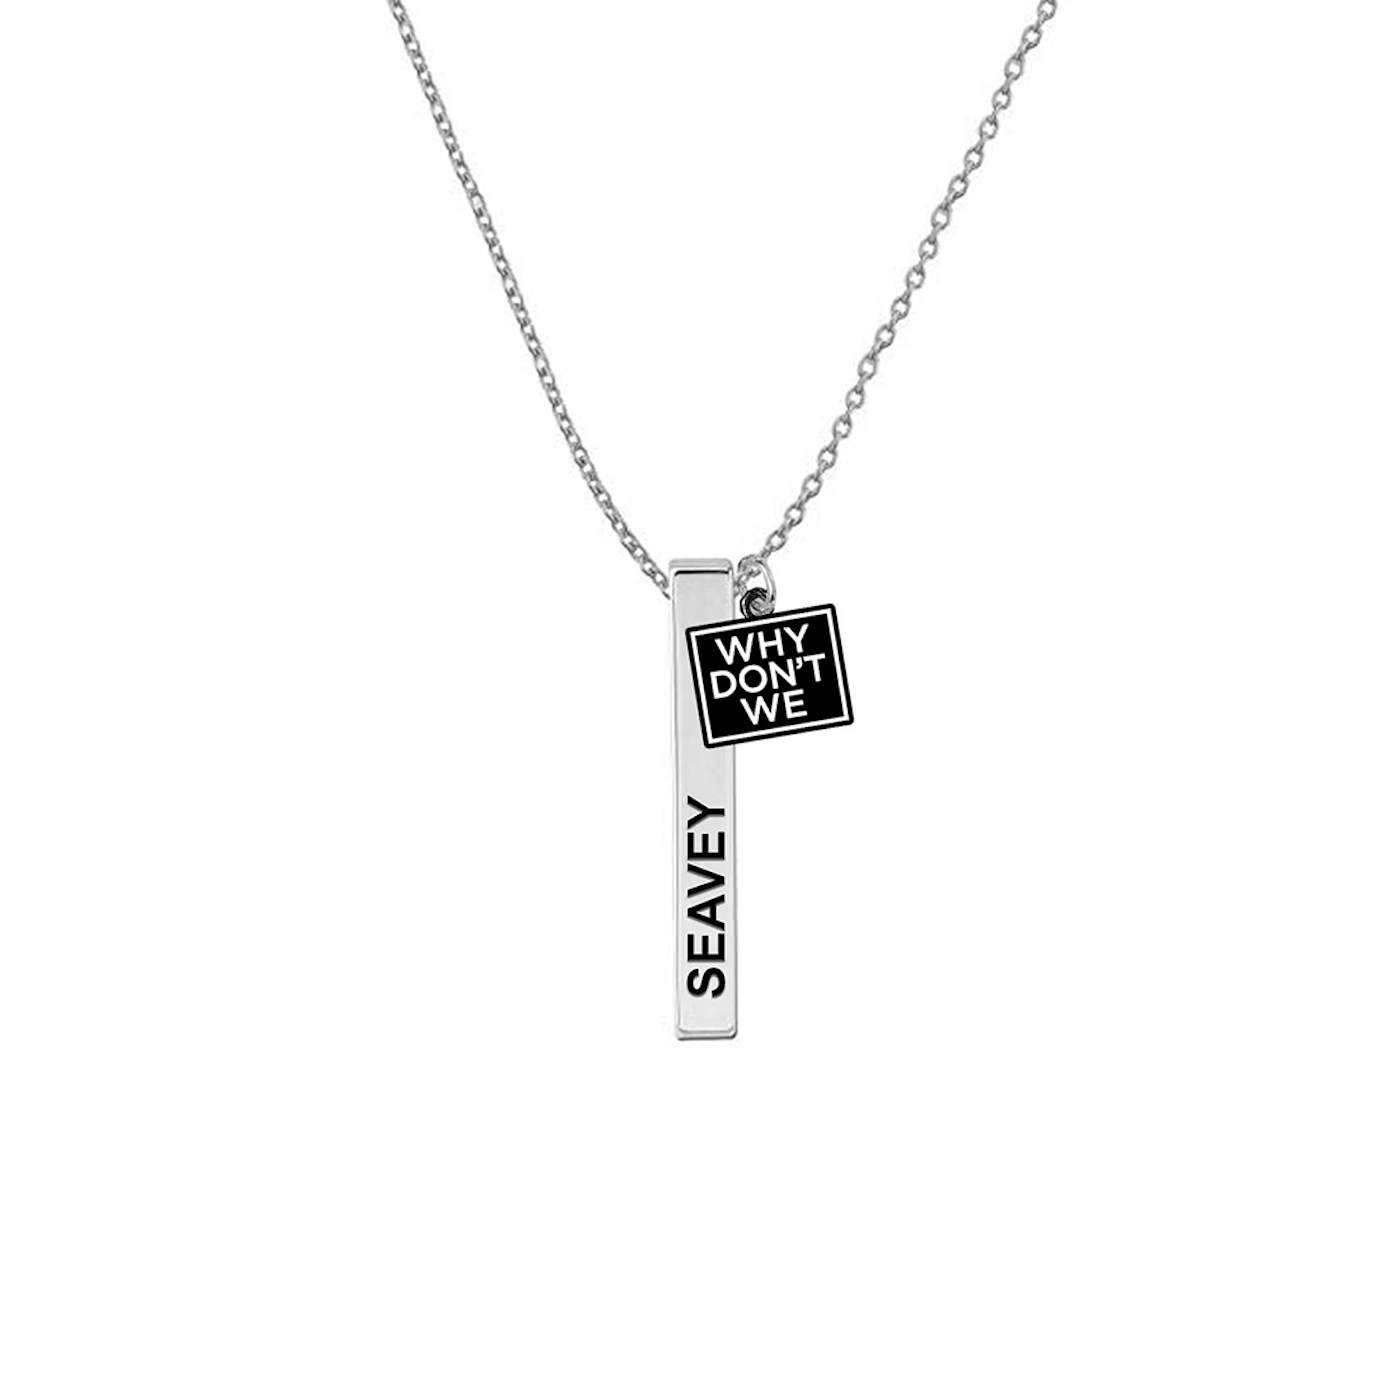 Why Don't We Seavey Necklace